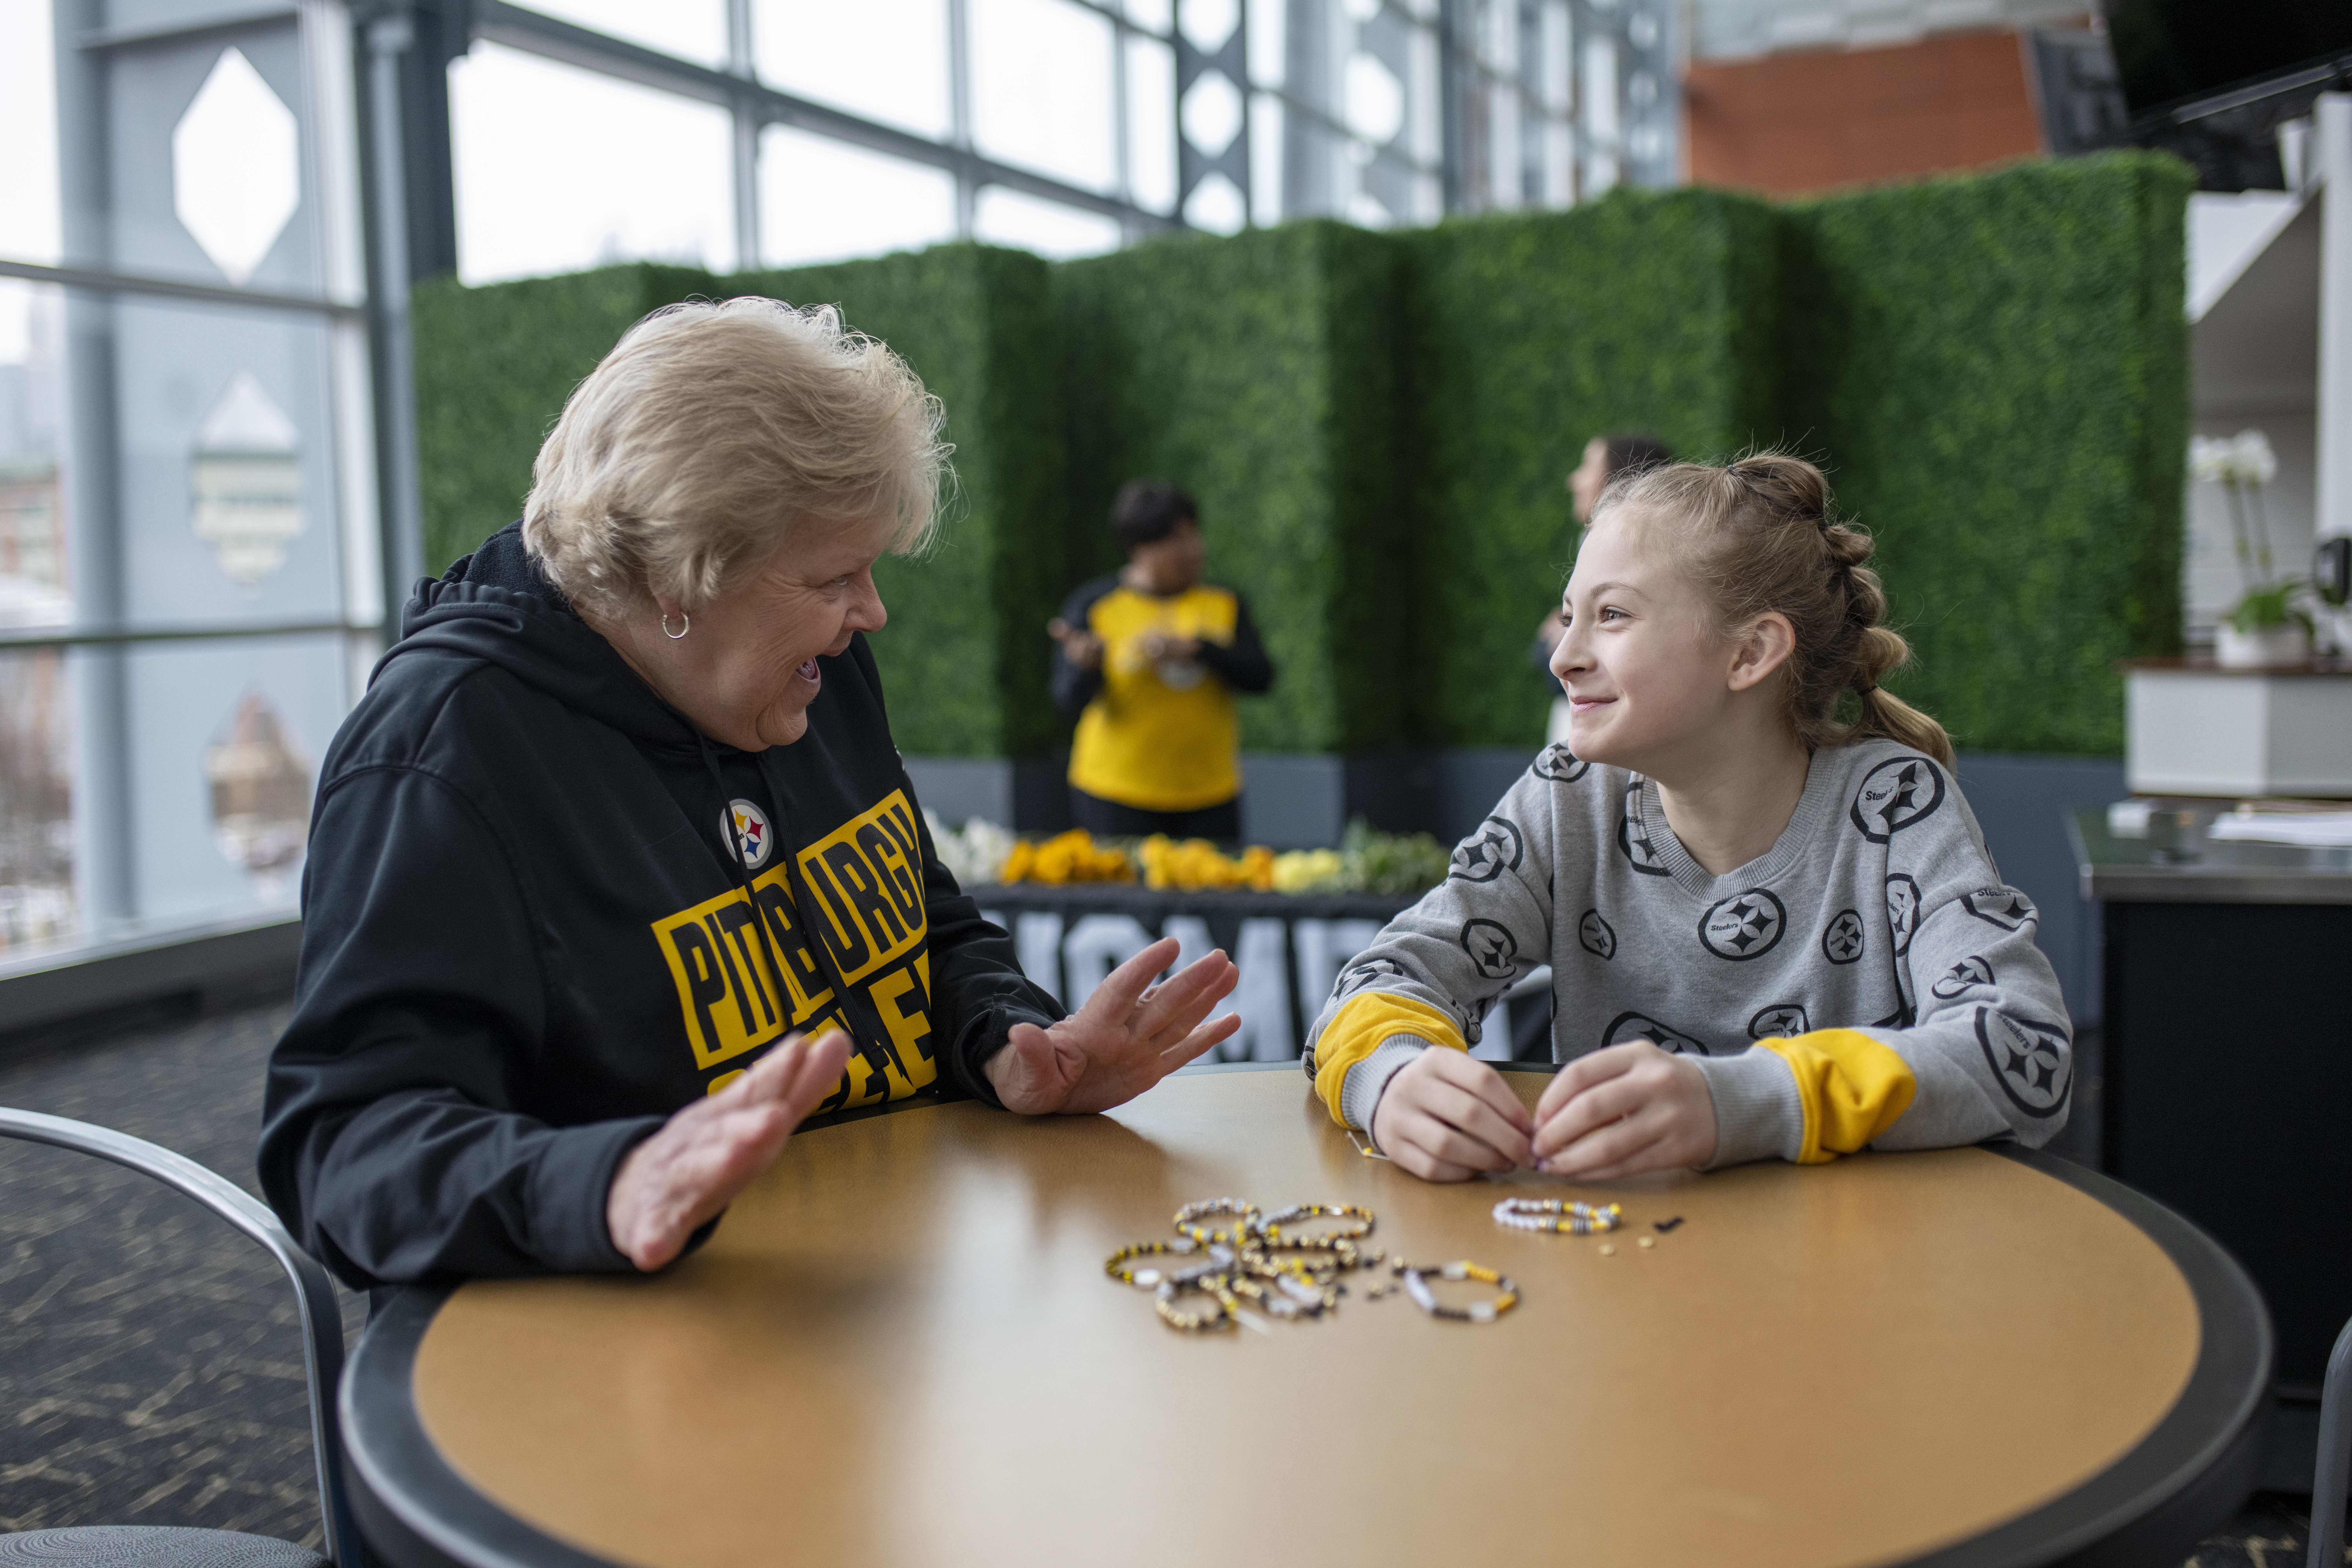 A photo of an older woman and a younger woman making black and gold friendship bracelets together at SteelHERS Social.